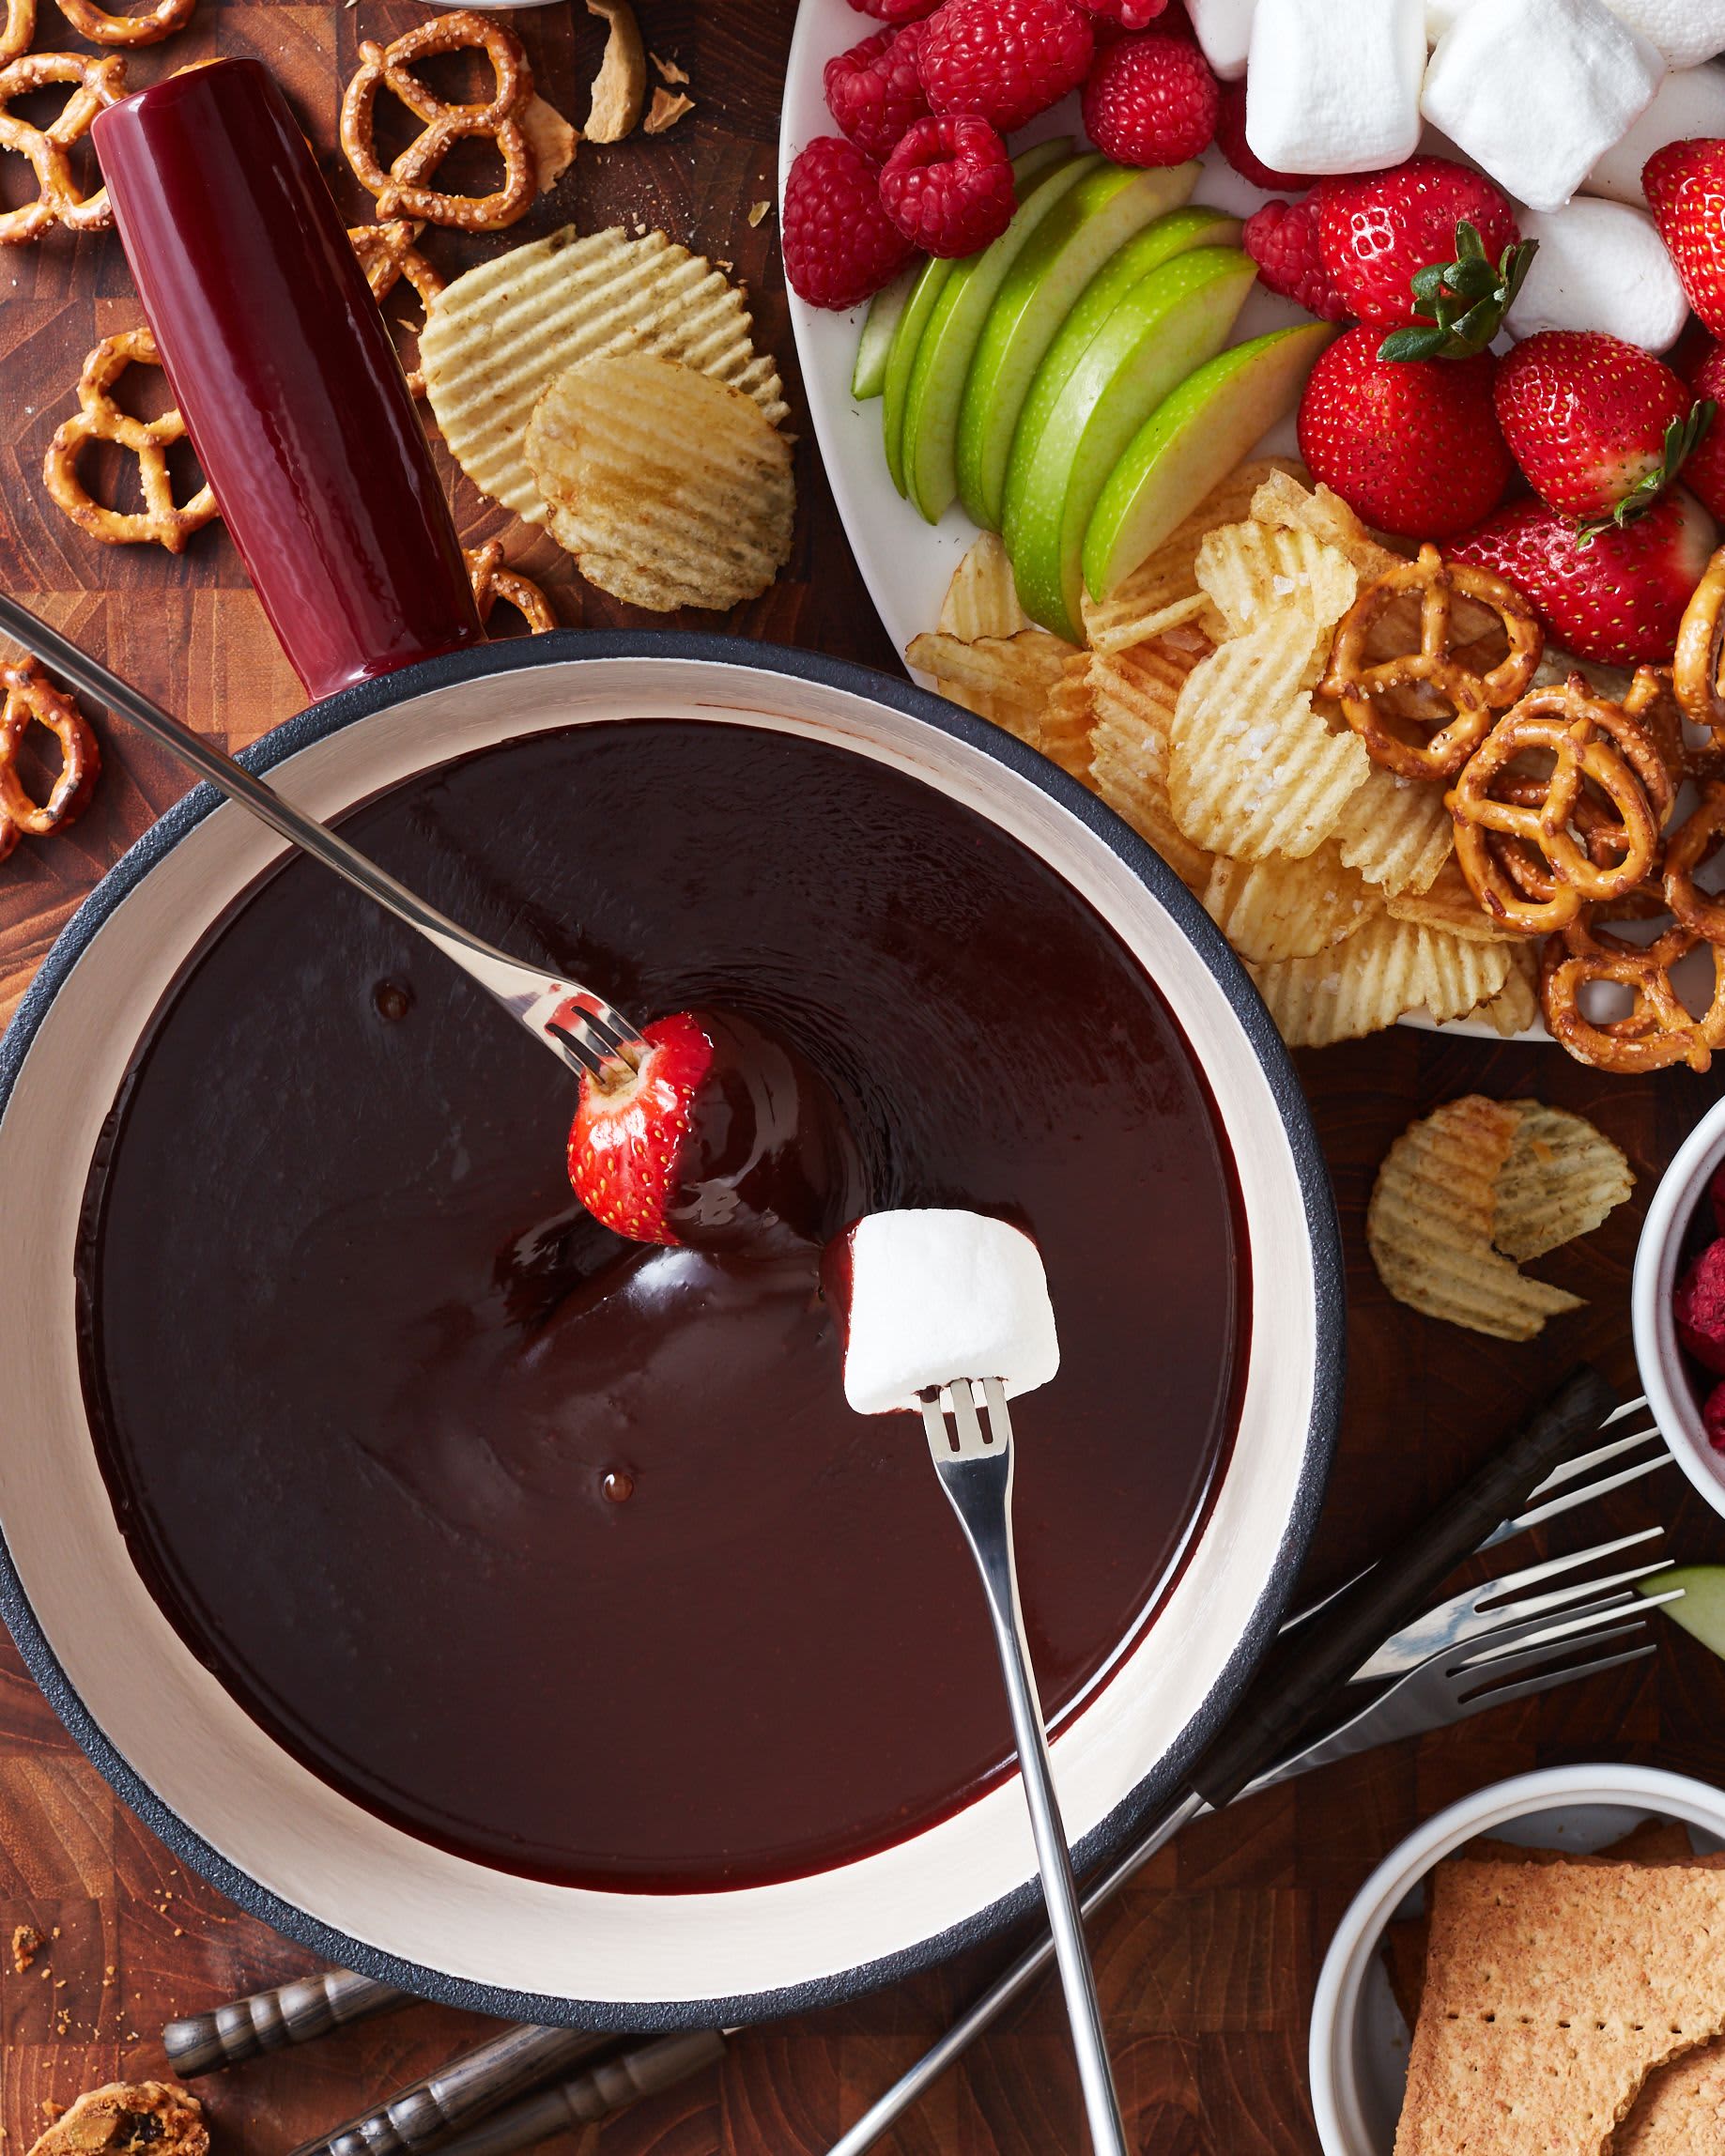 https://cdn.apartmenttherapy.info/image/upload/v1703087726/k/Photo/Recipes/2021-02-how-to-chocolate-fondue/2021_howto_chocolatefondue_lead1_306_9a2b98_cropped.jpg